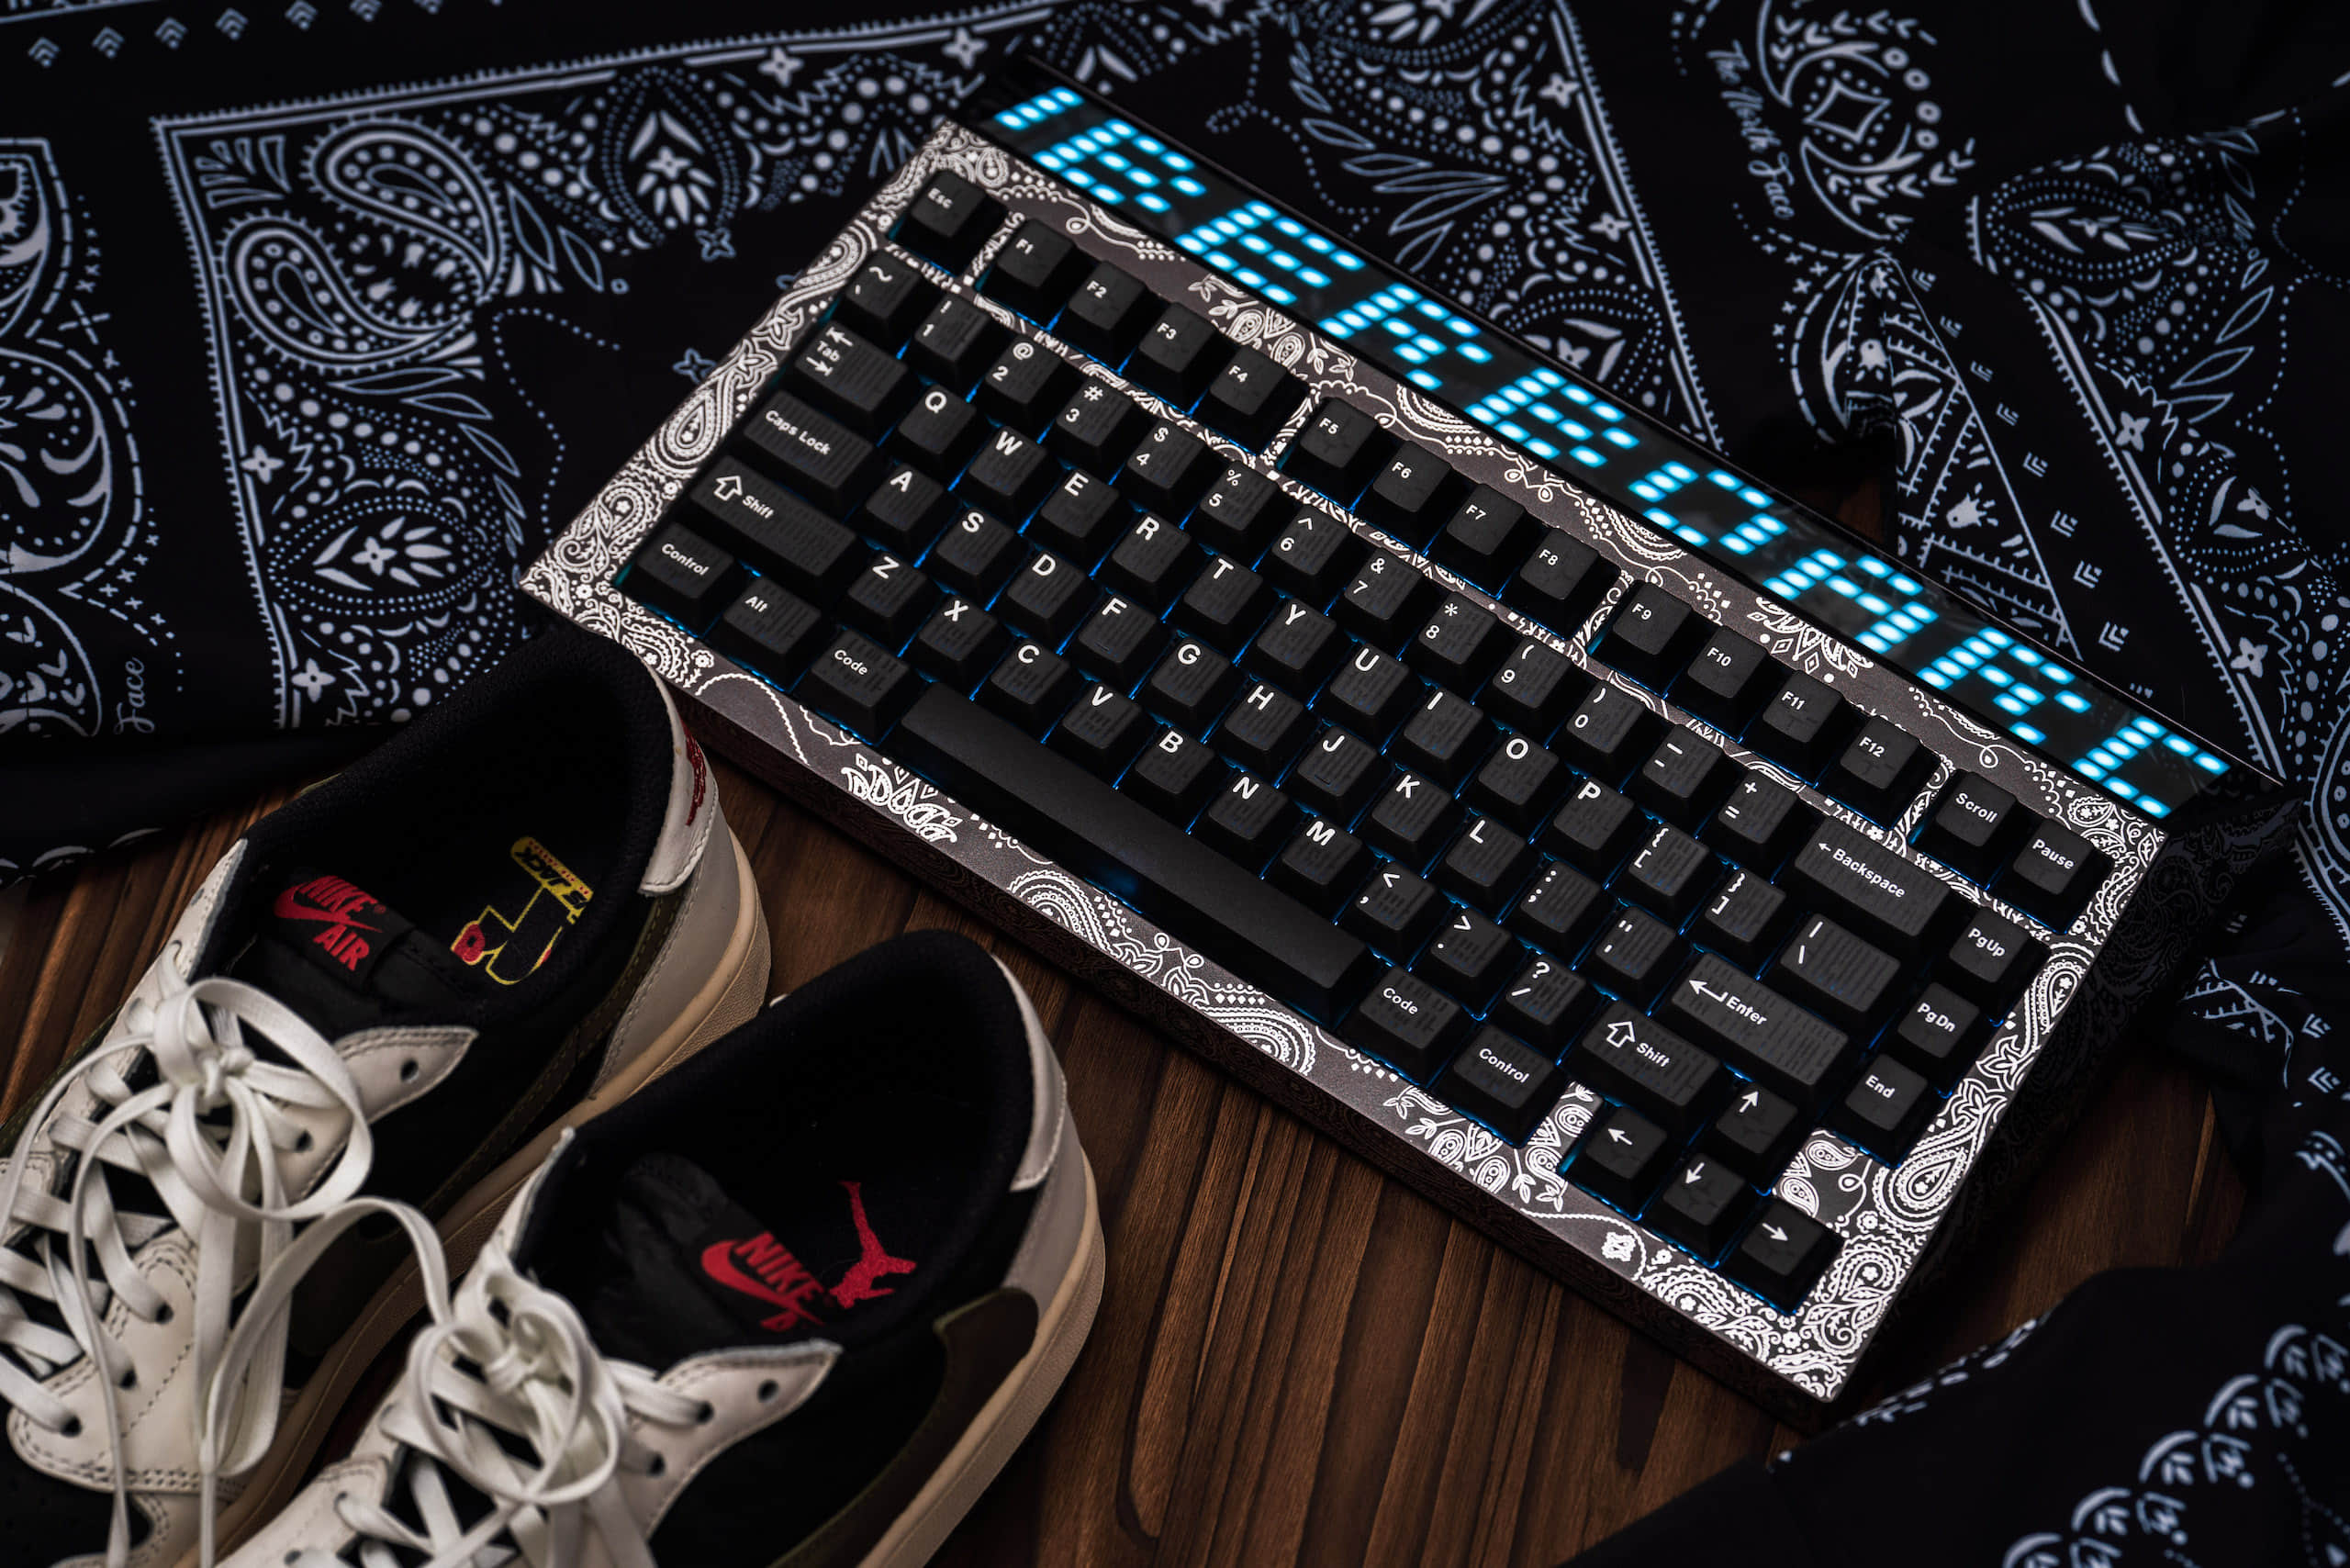 THE FUTURE IS HERE! Cyberboard R4 Mechanical Keyboard by Angry